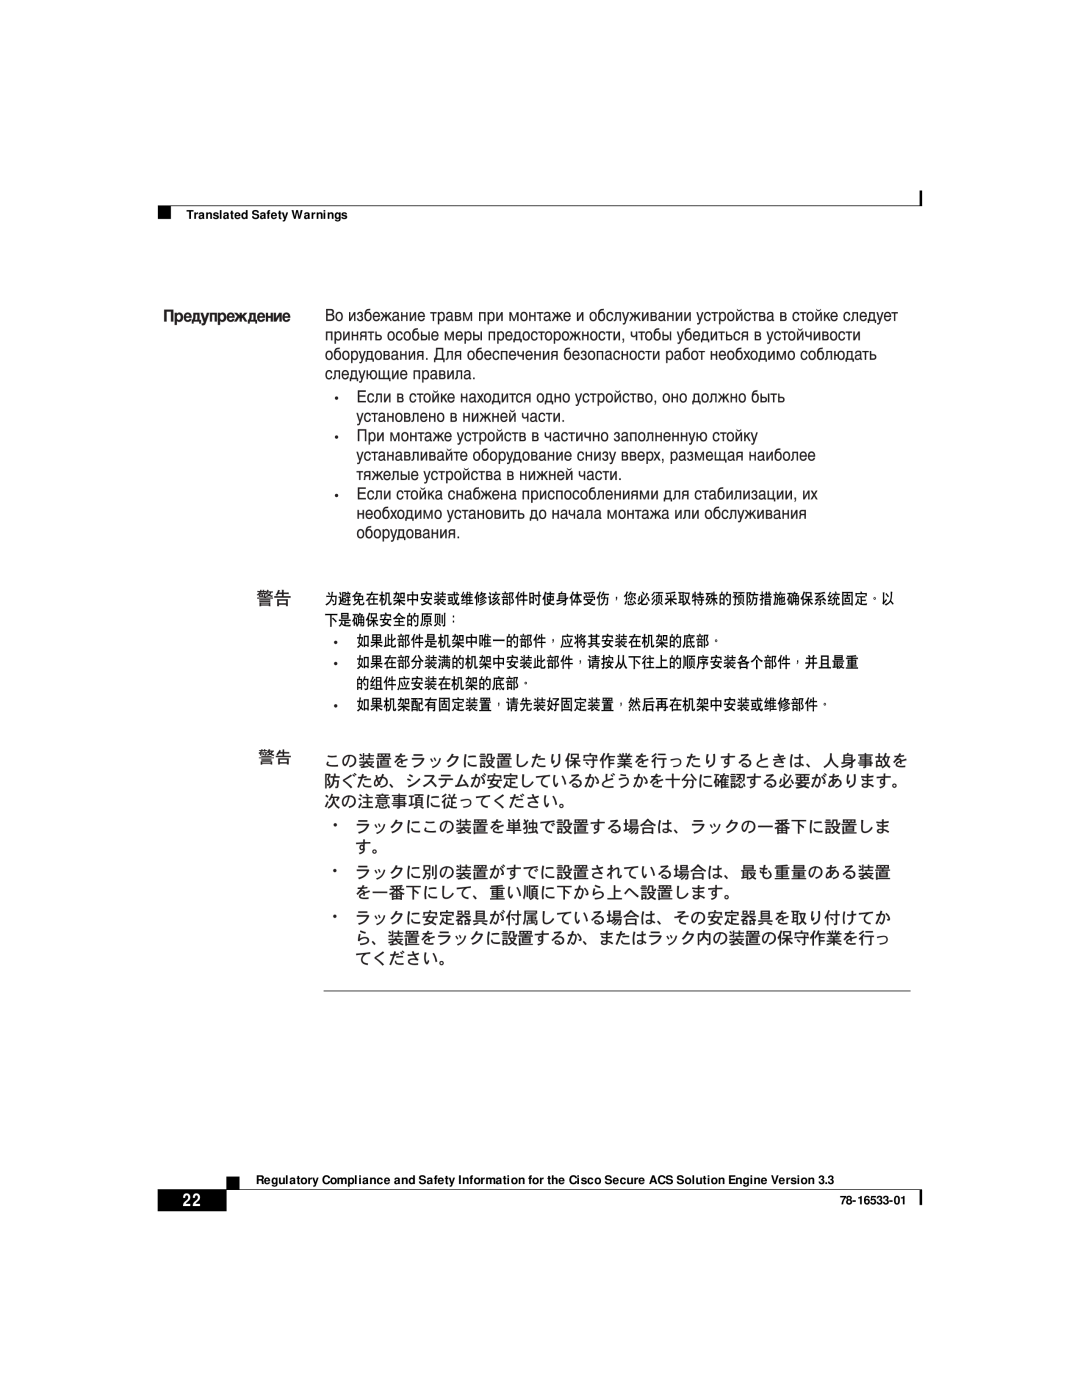 Cisco Systems CSACSE-1112-K9 manual Translated Safety Warnings, 78-16533-01 